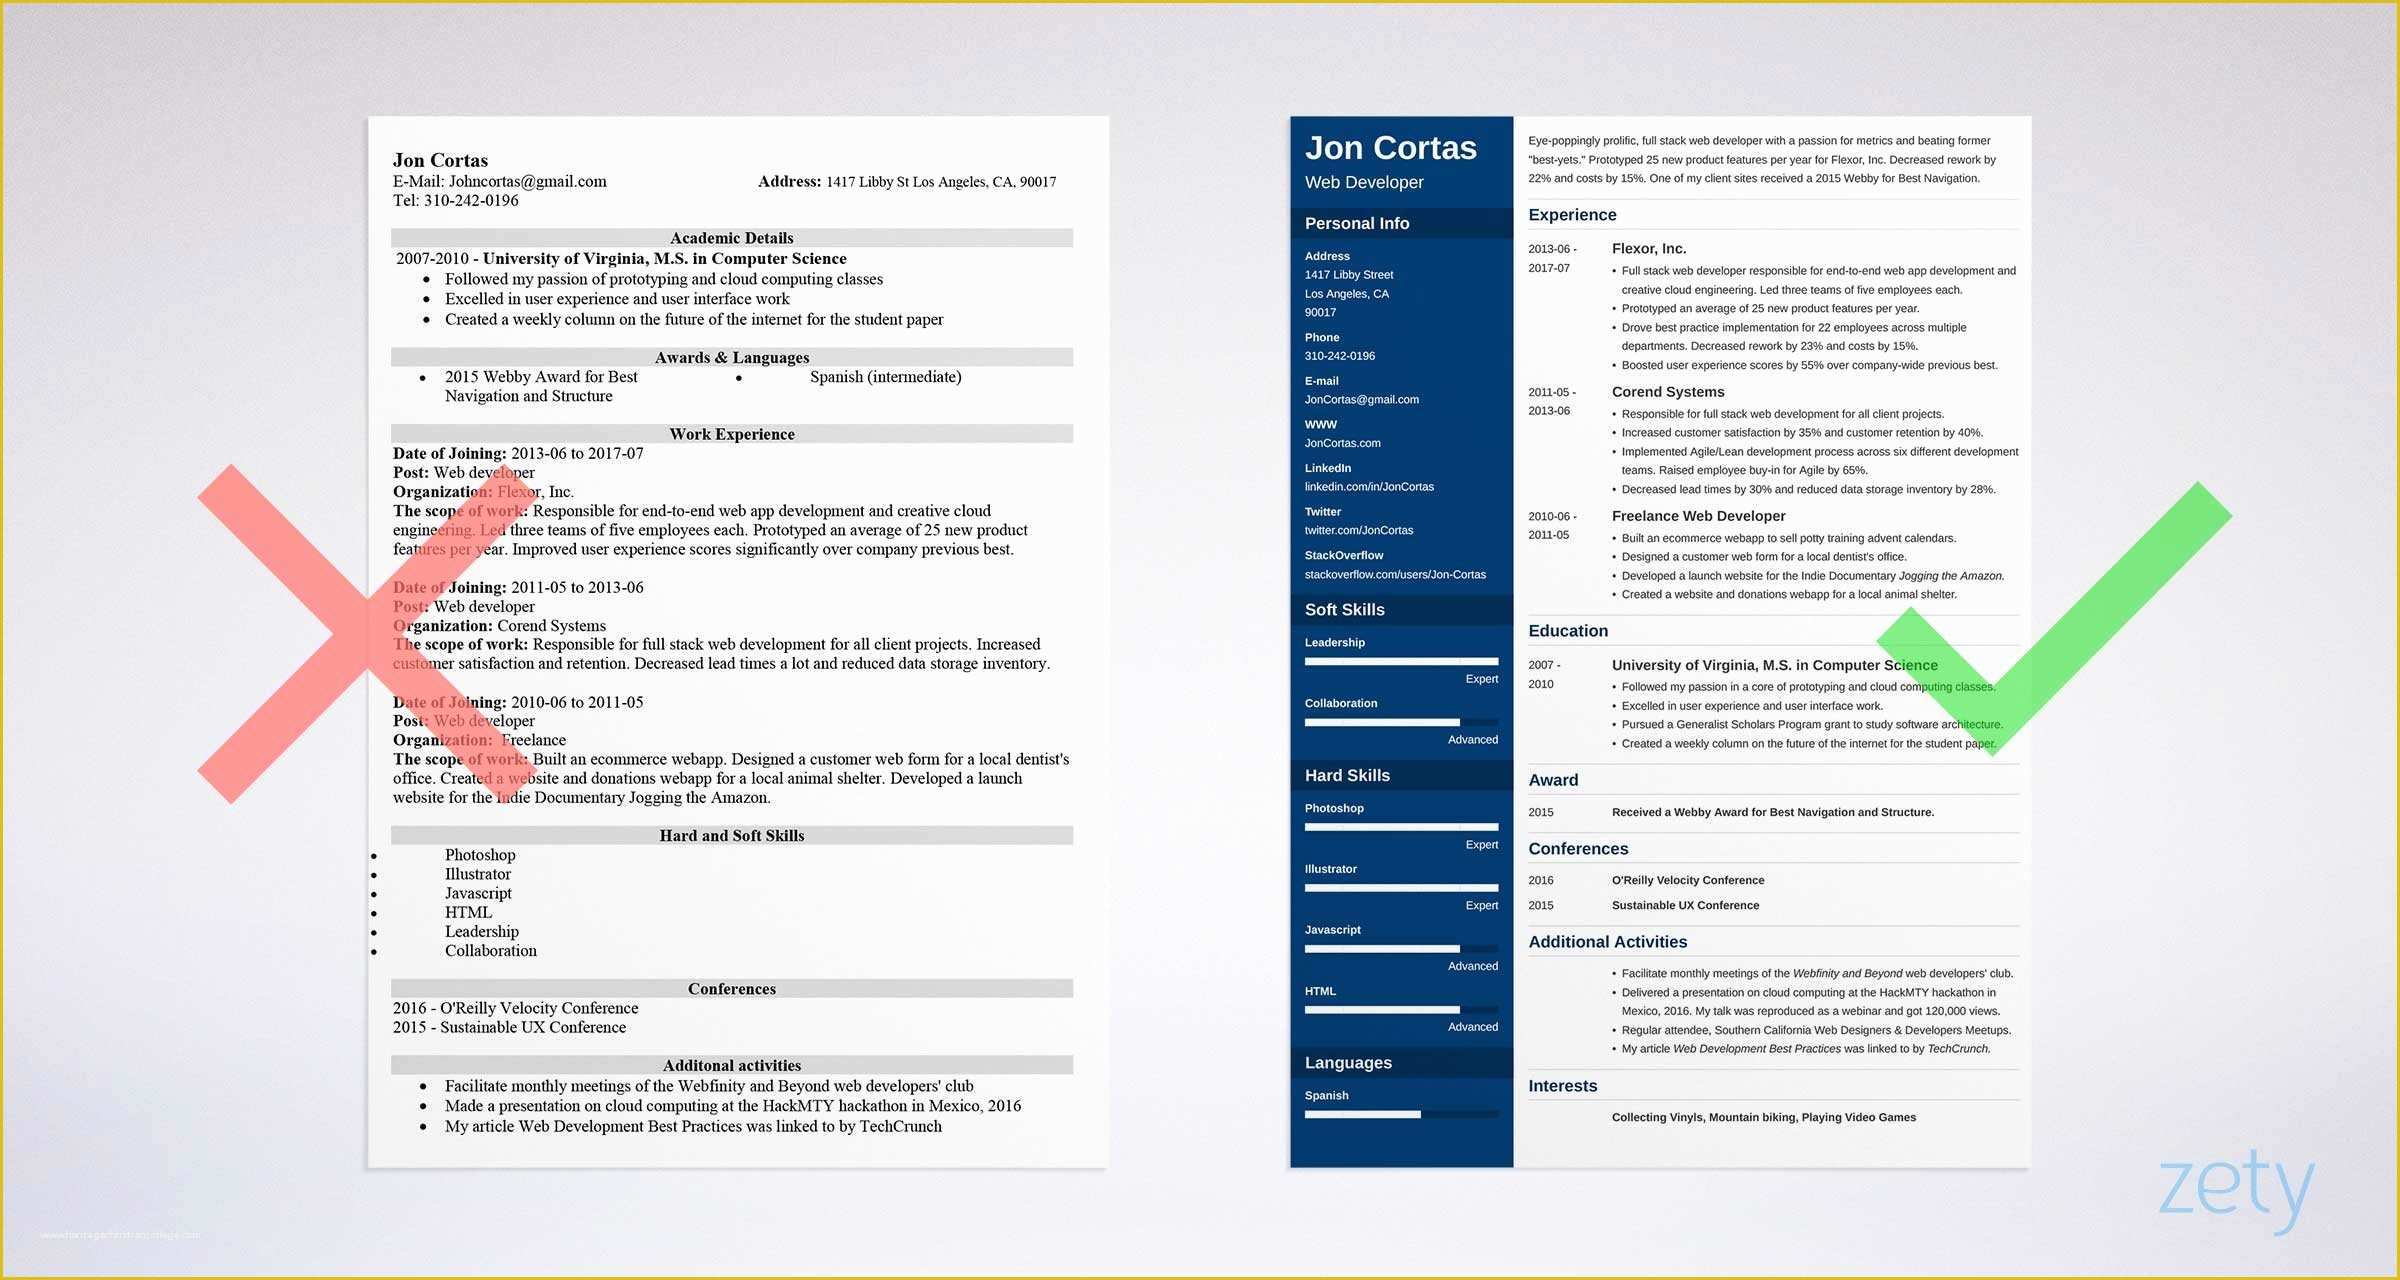 Free Template for Cv In Word Of Free Resume Templates for Word 15 Cv Resume formats to